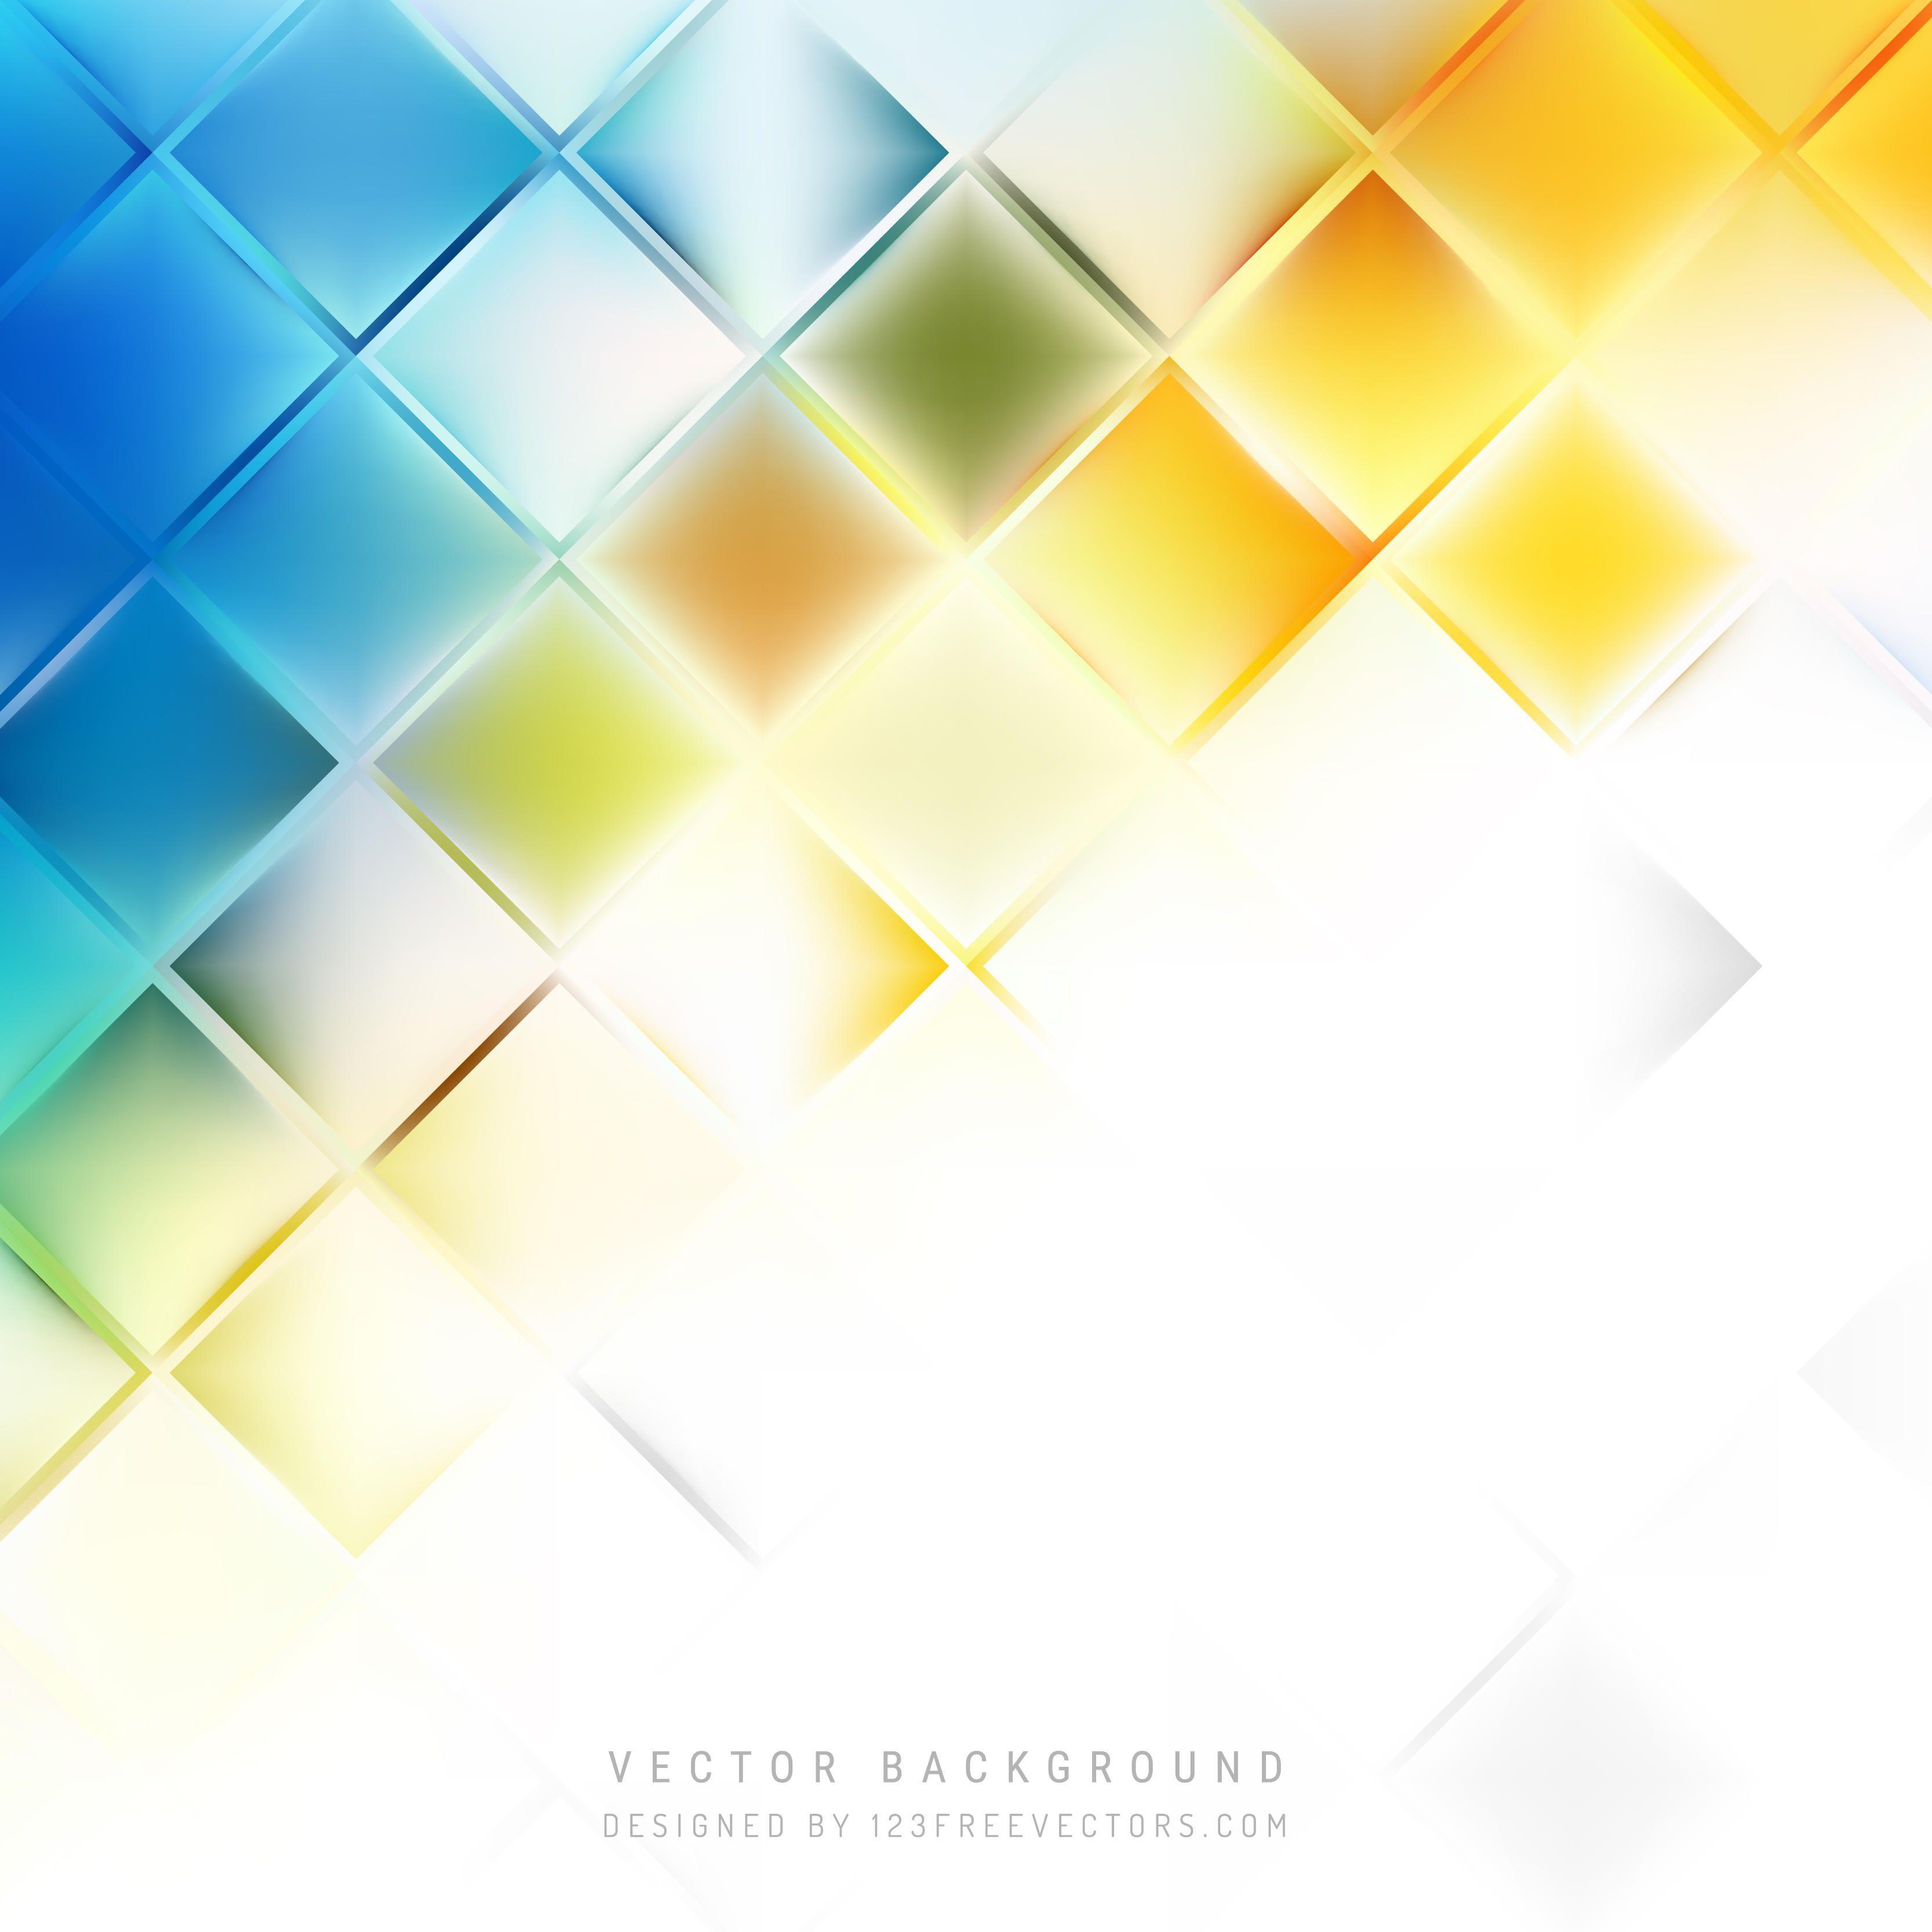 Abstract Light Colorful Square Background DesignFreevectors